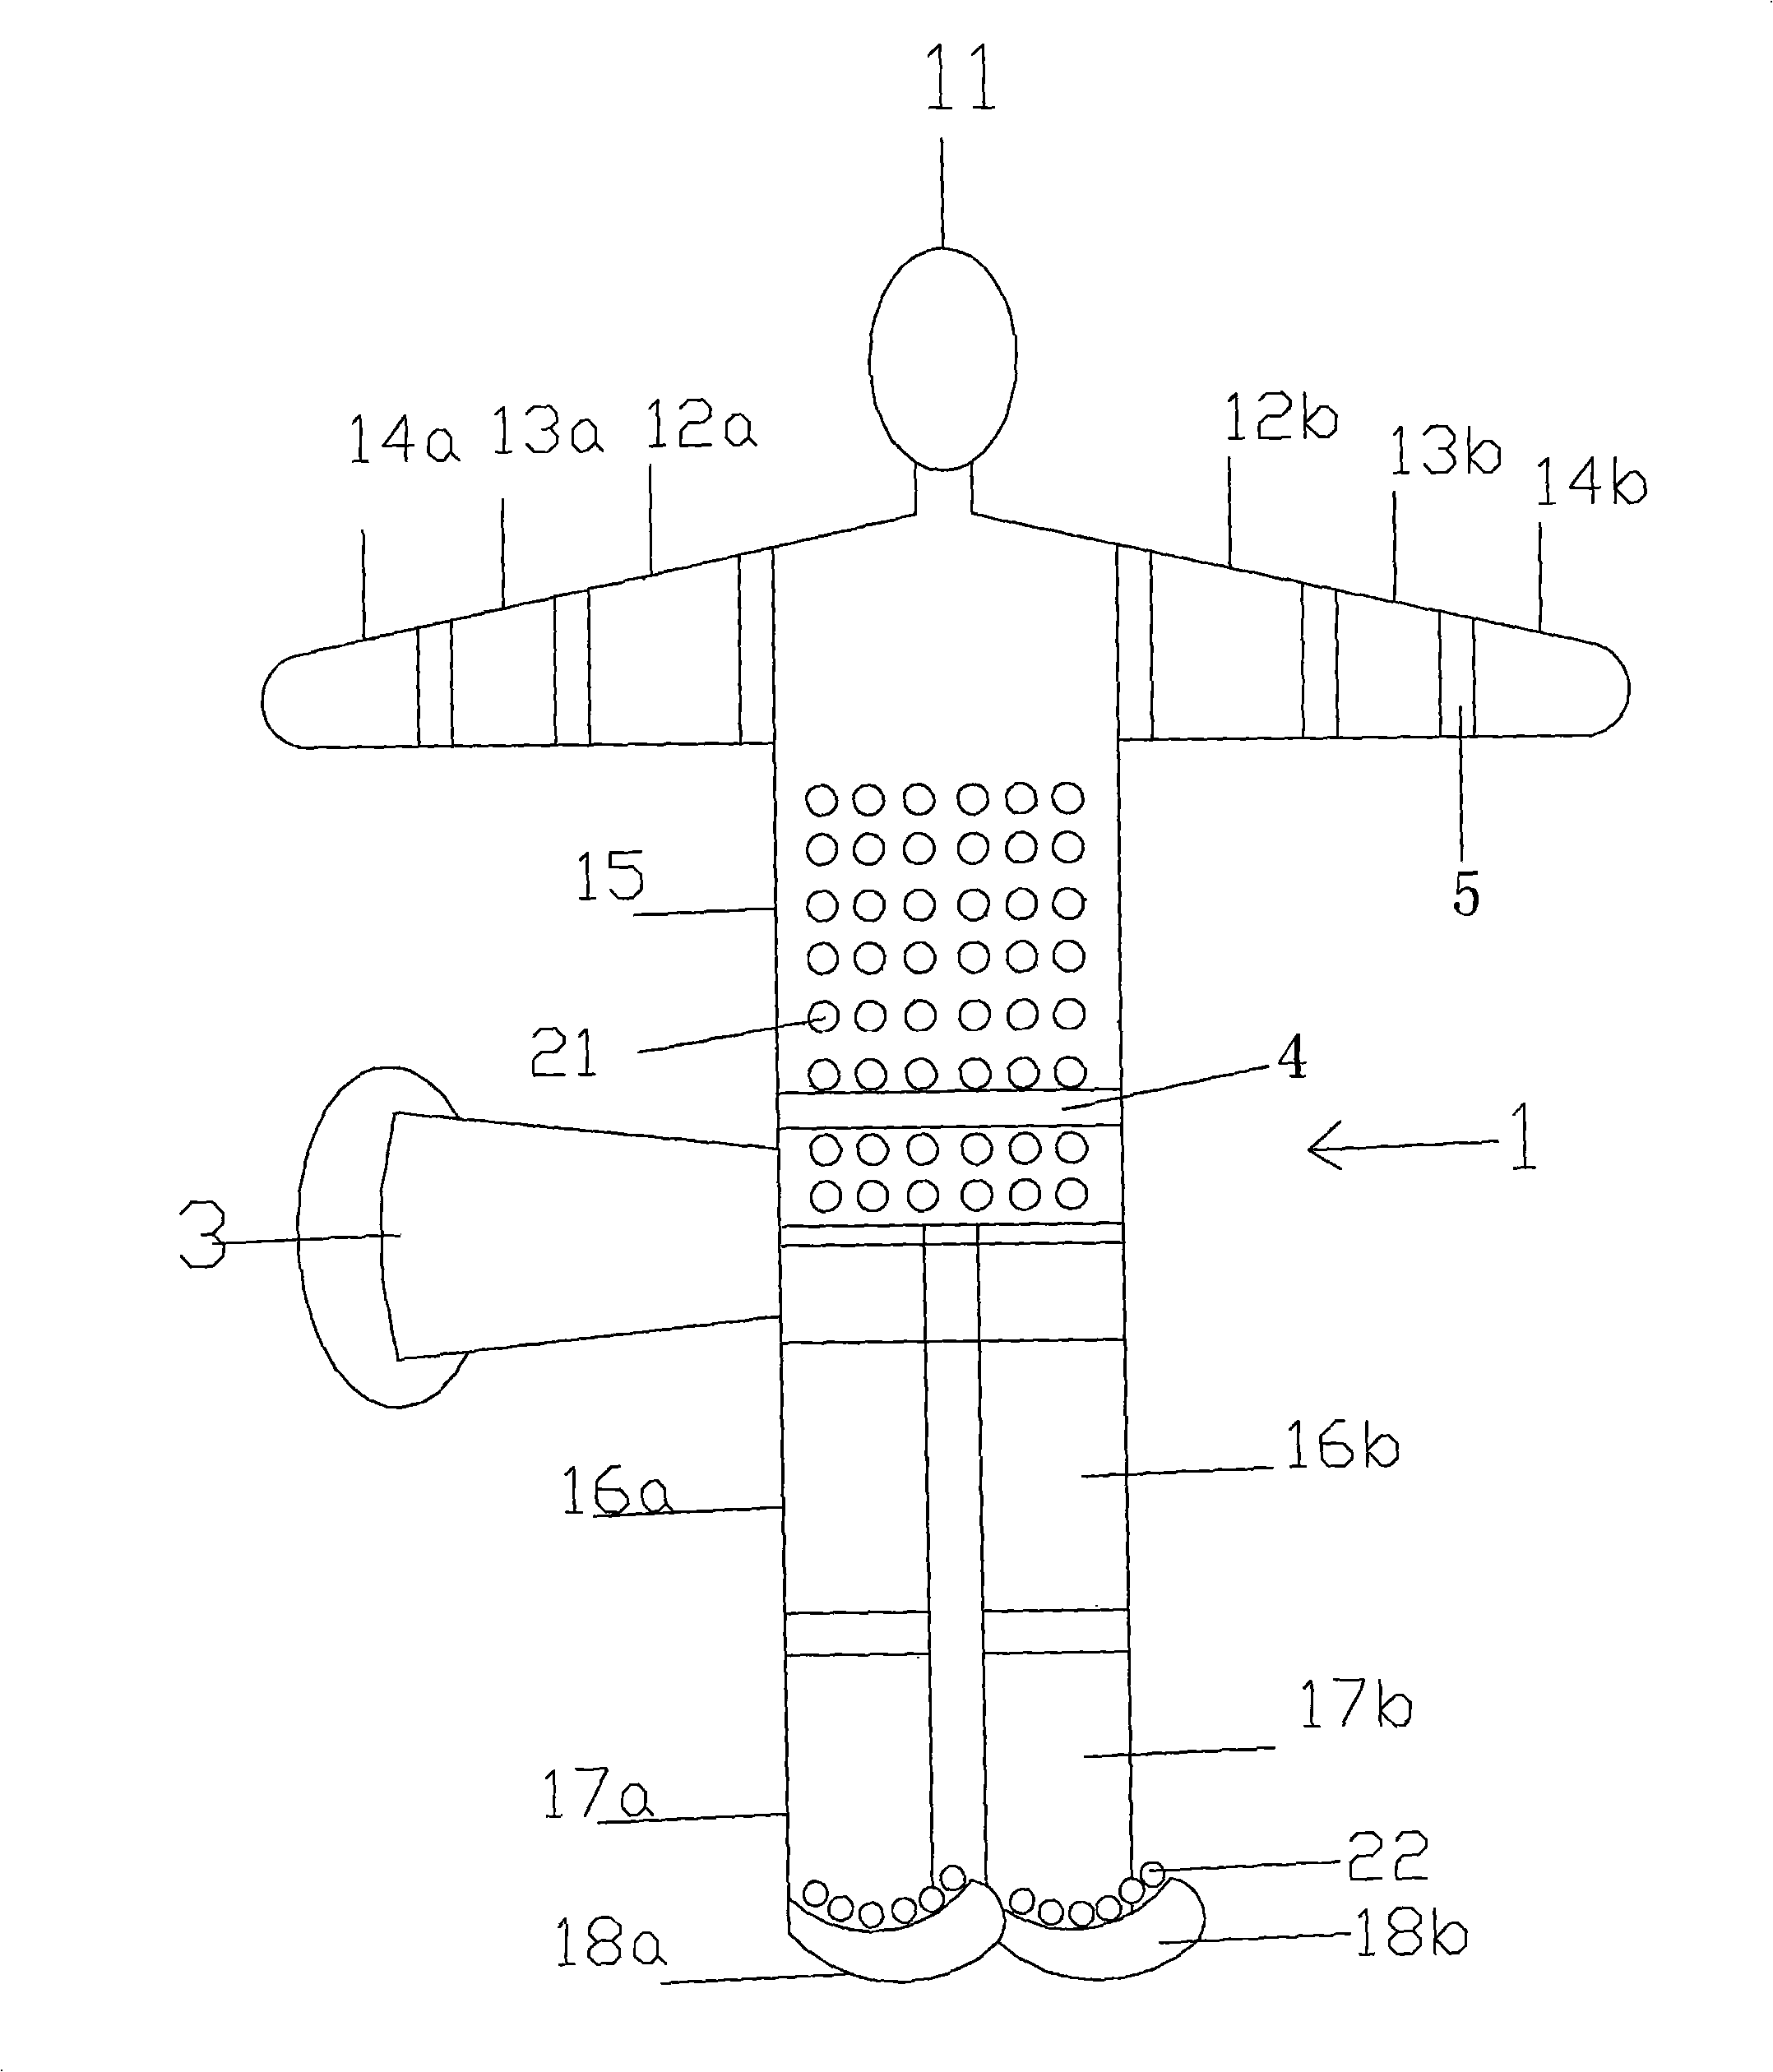 Human-shaped passive exercise device